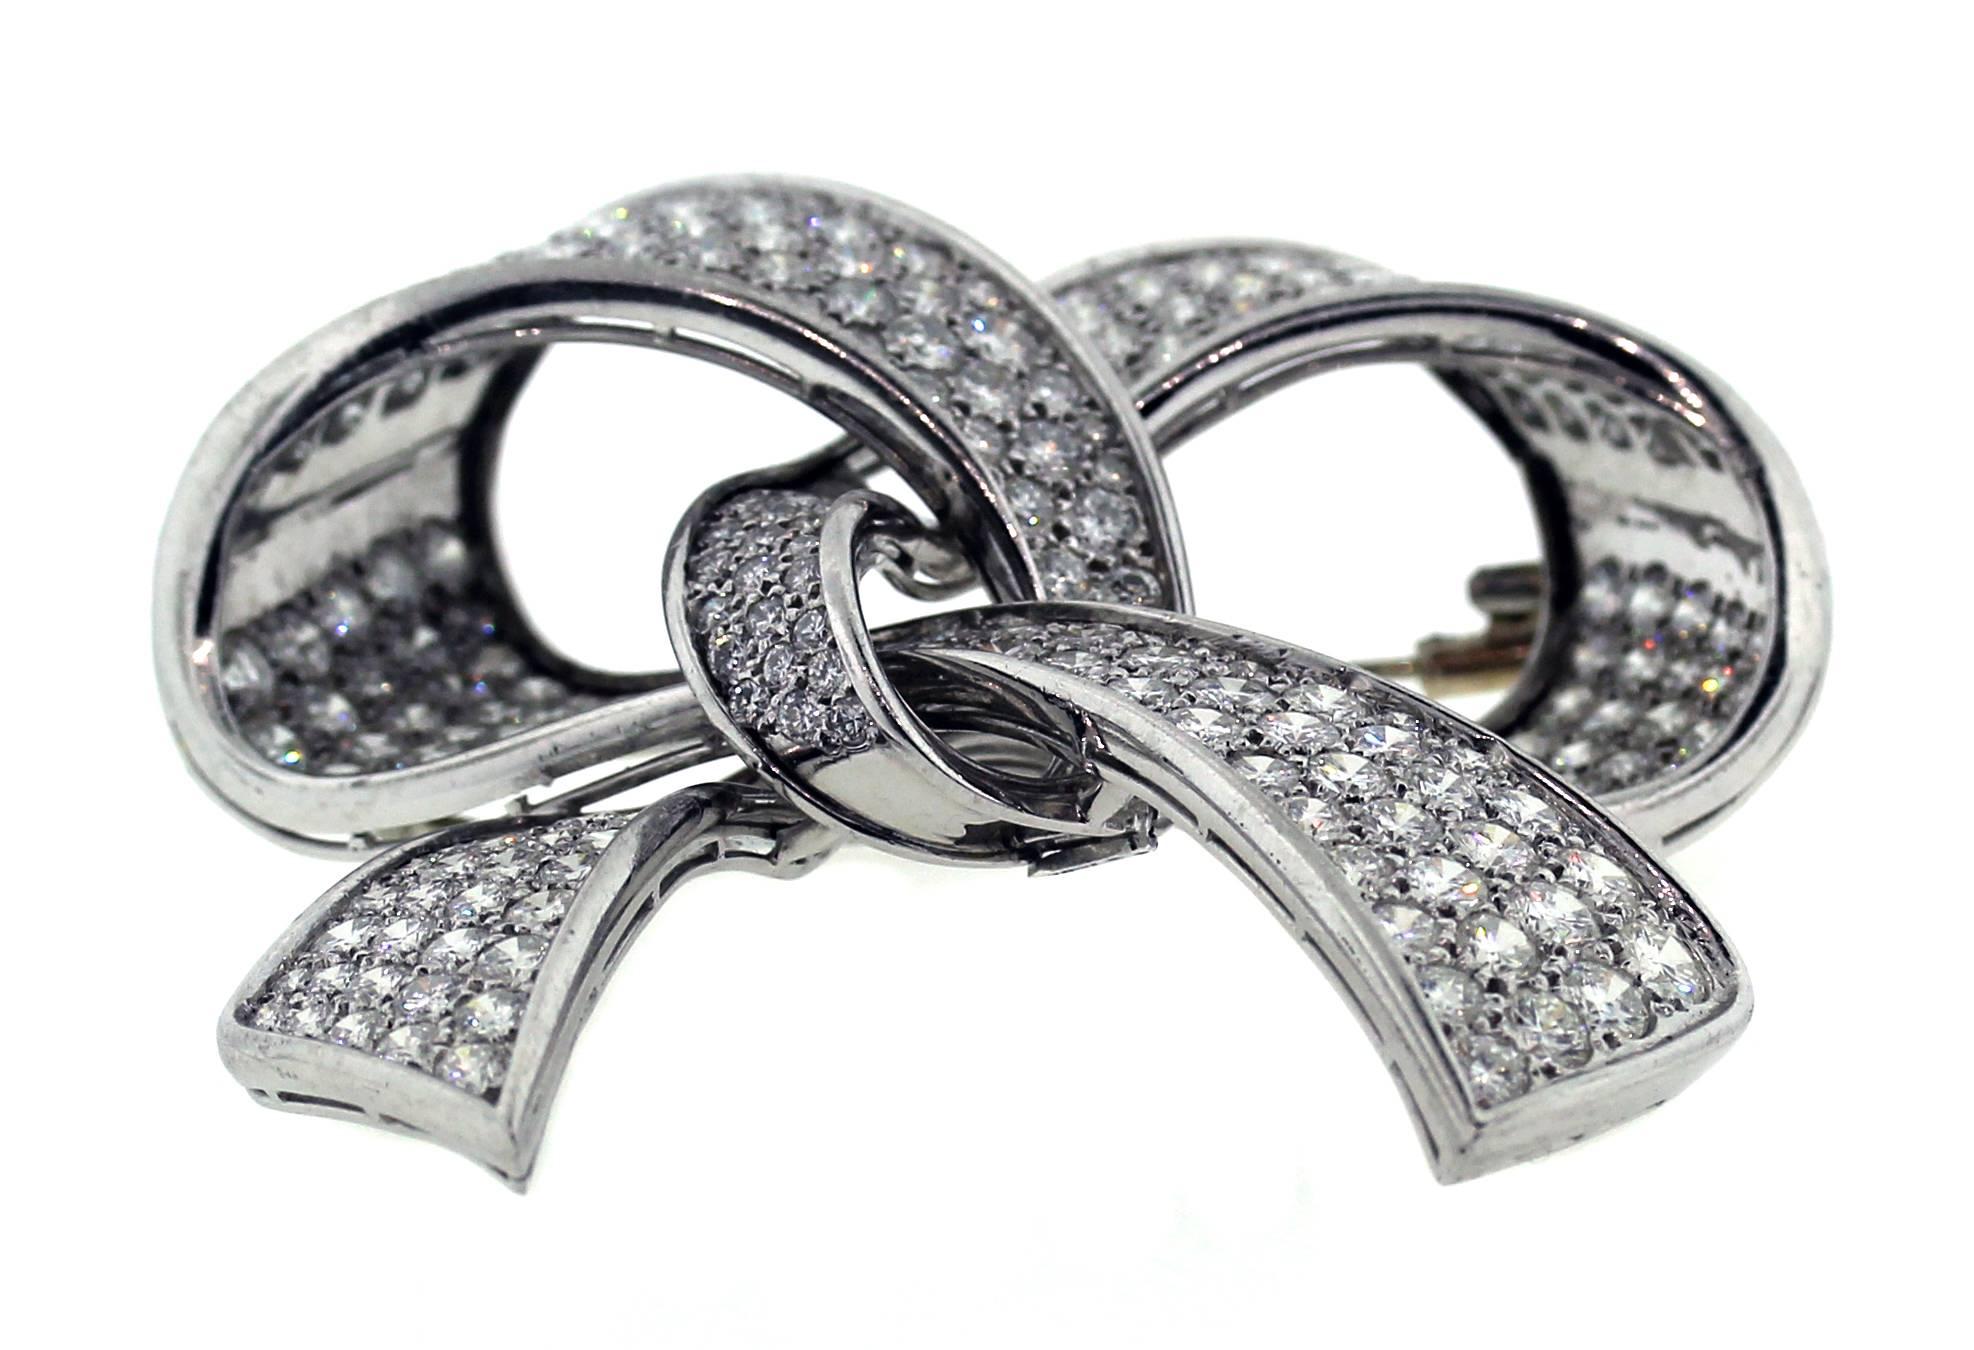 18K White Gold Platinum 25 Carat Round Diamonds Ladies Ribbon Large Brooch Pin

Apprx. 25 carats G Color, VS Clarity Diamonds

Pin is 2.5 inches in length and 2.4 inches wide

Estate